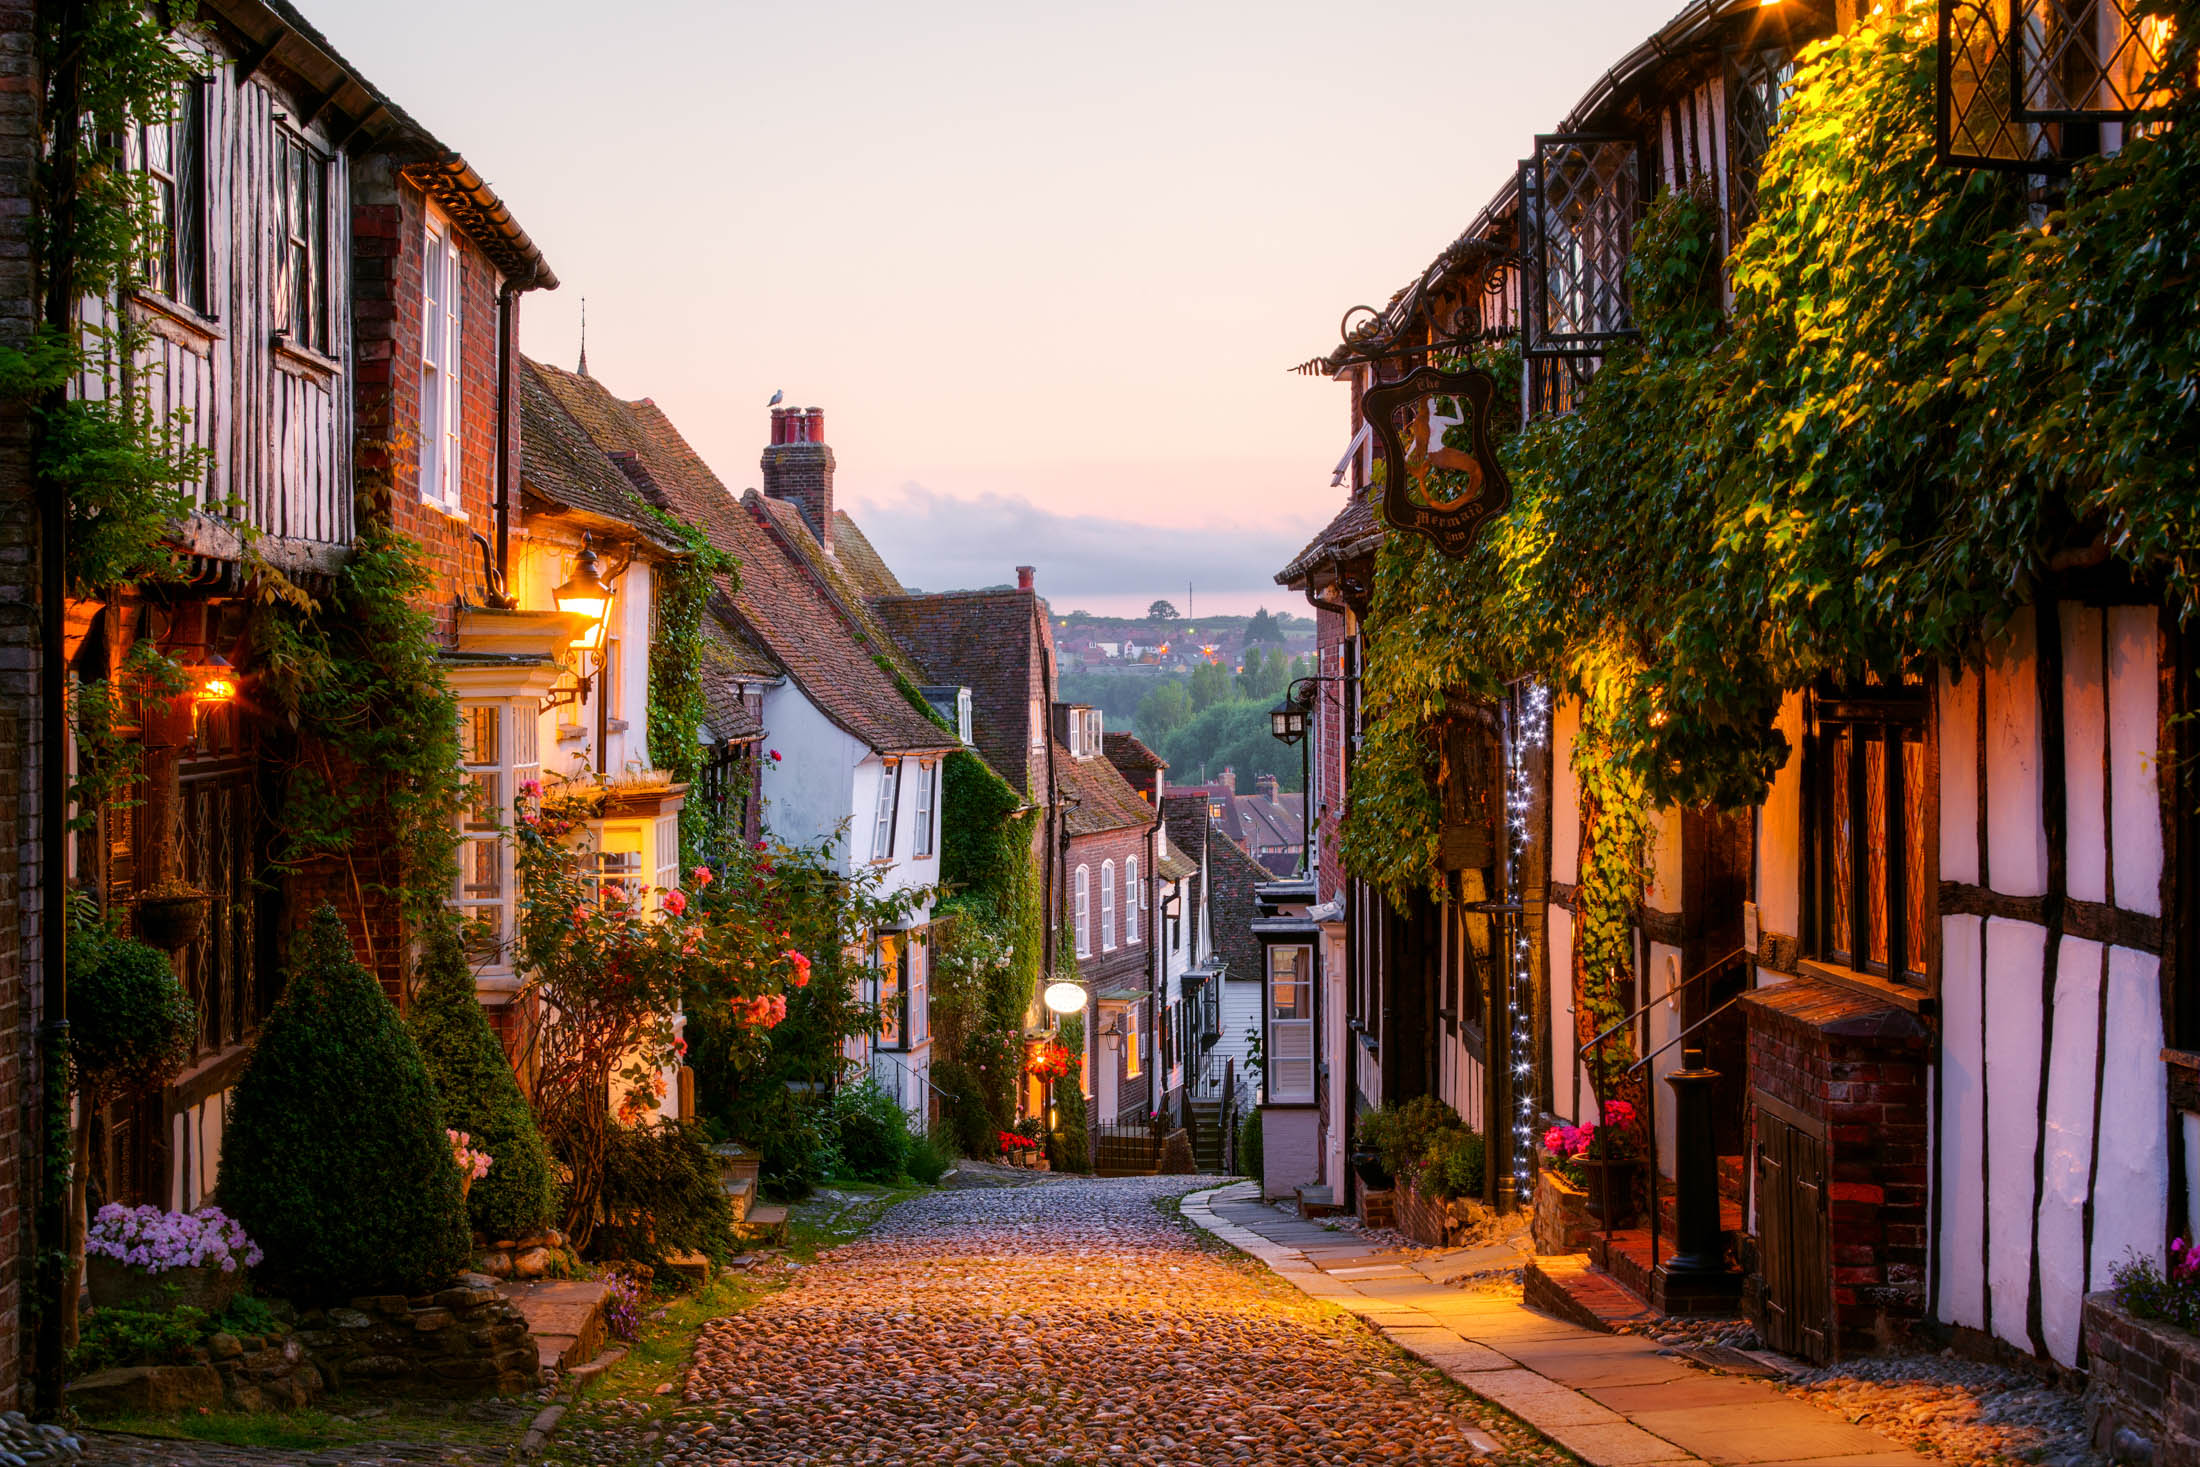 Mermaid Street in Rye is one of the most picturesque&nbsp;in England.